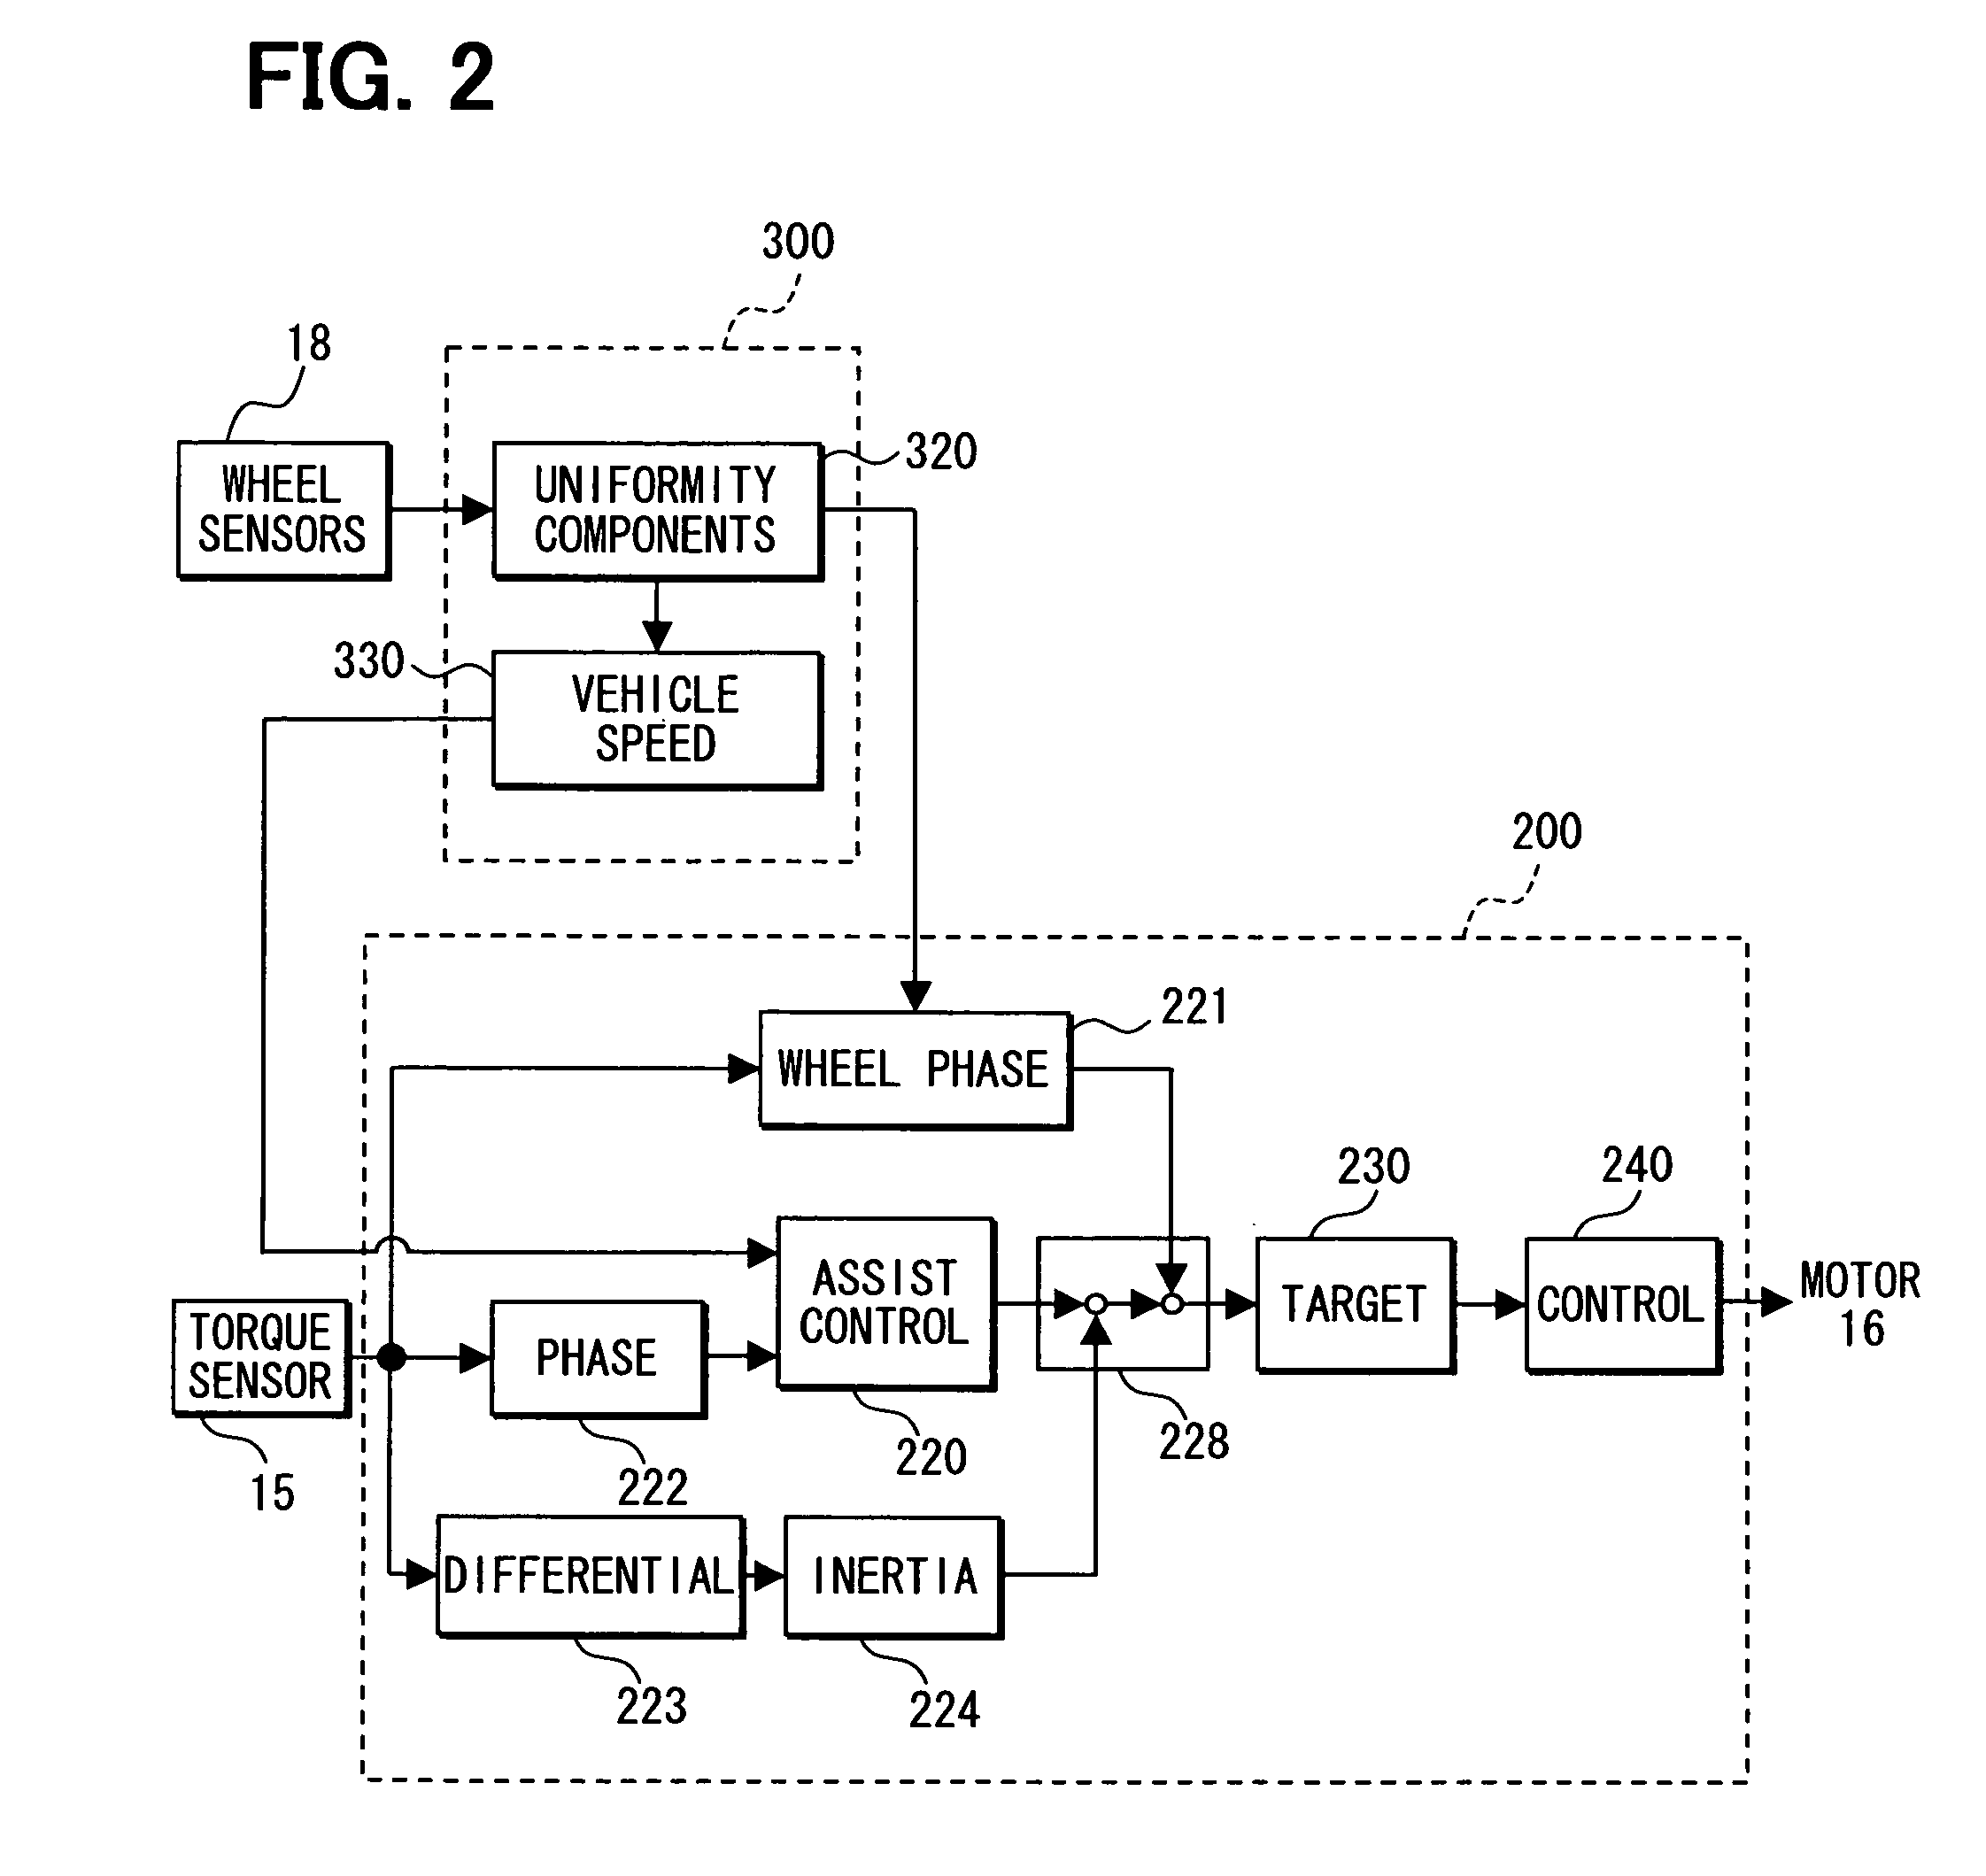 Apparatus for controlling vehicle